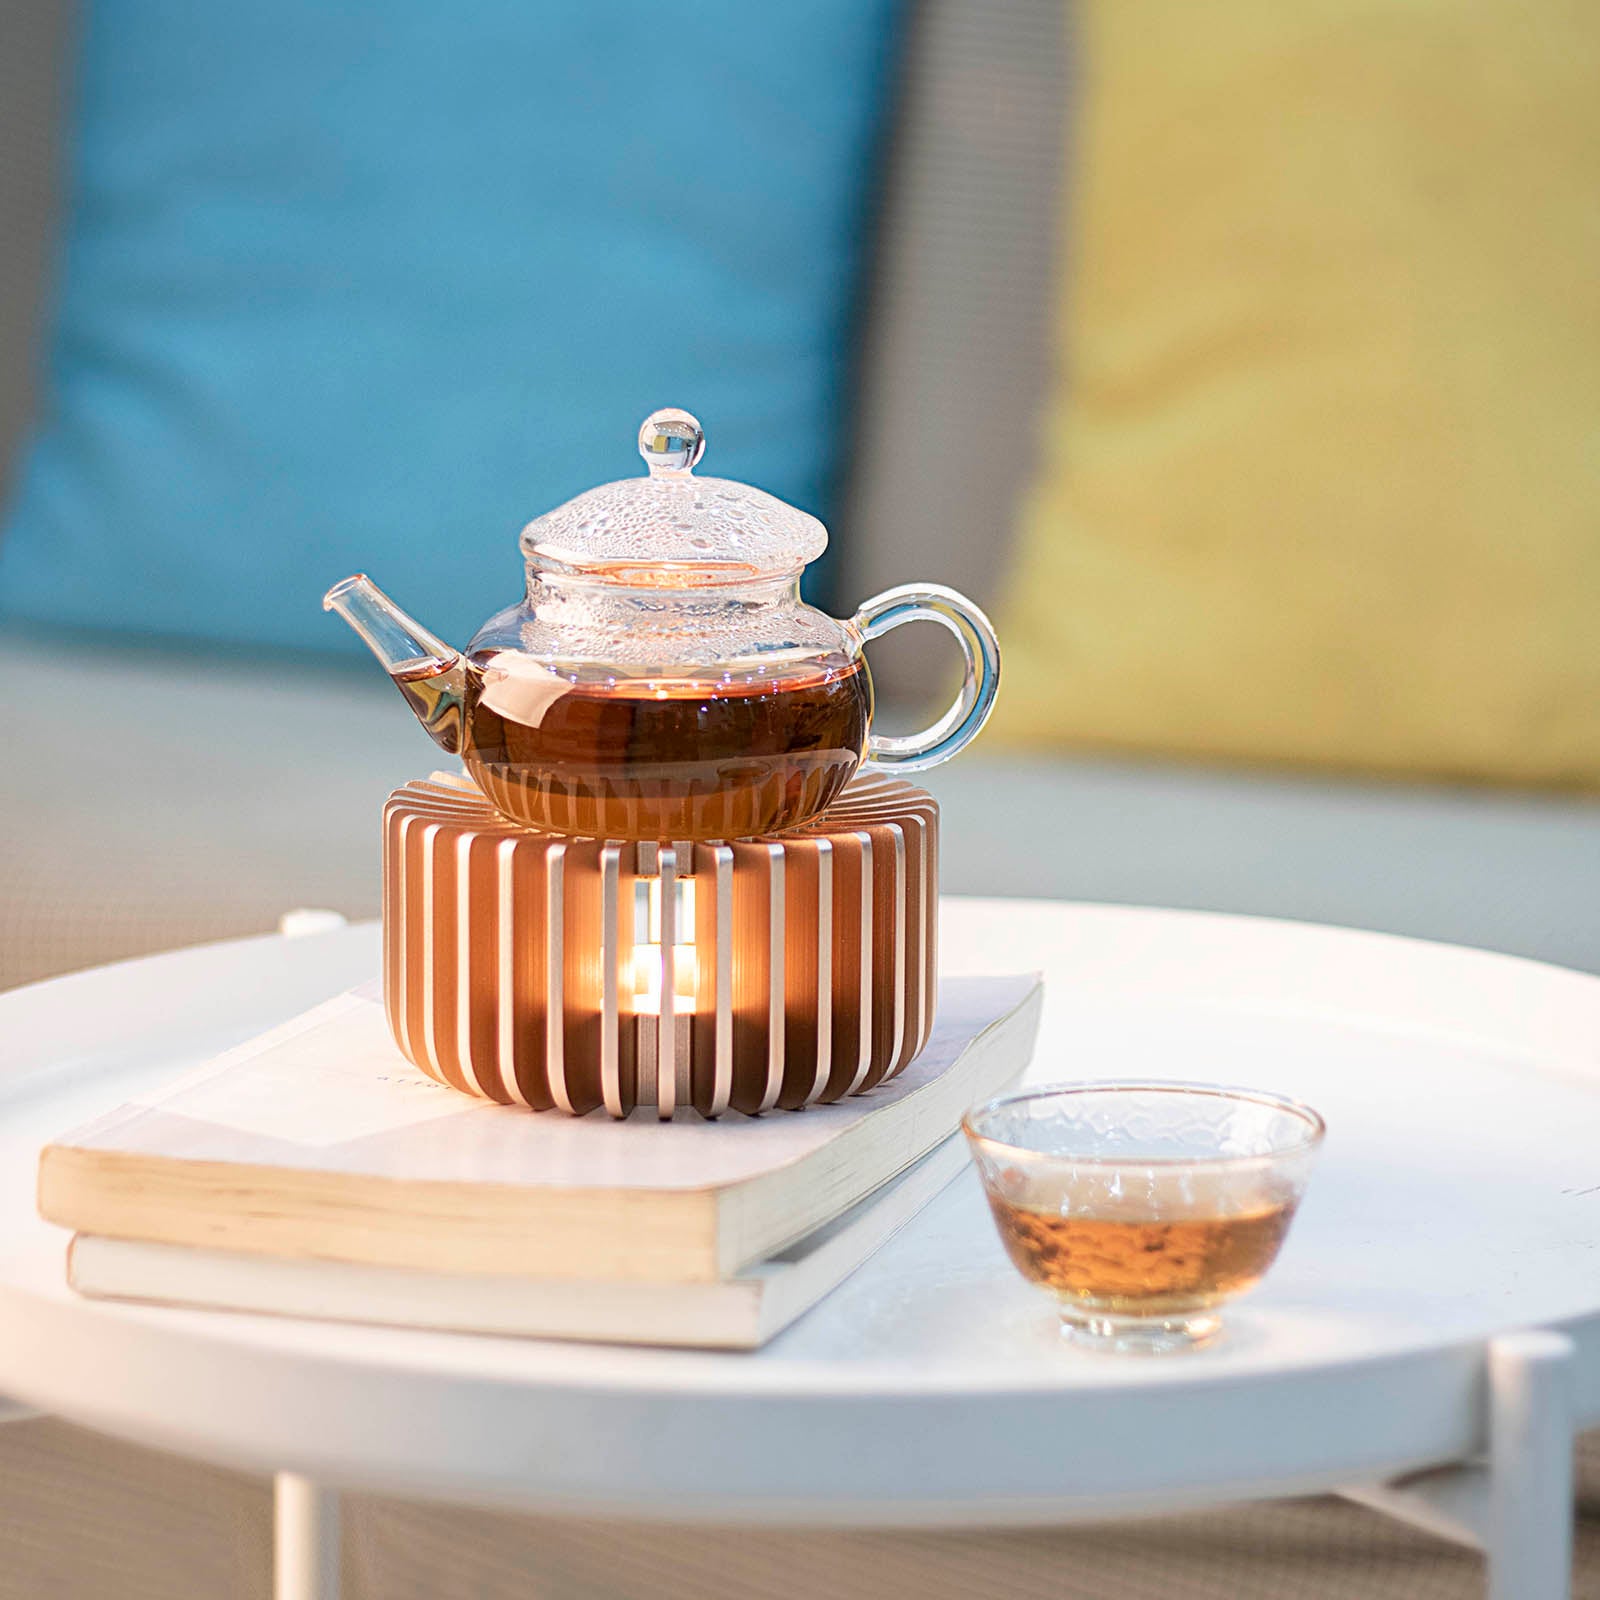 Copper Rose Glass Teapot with Tealight Warmer